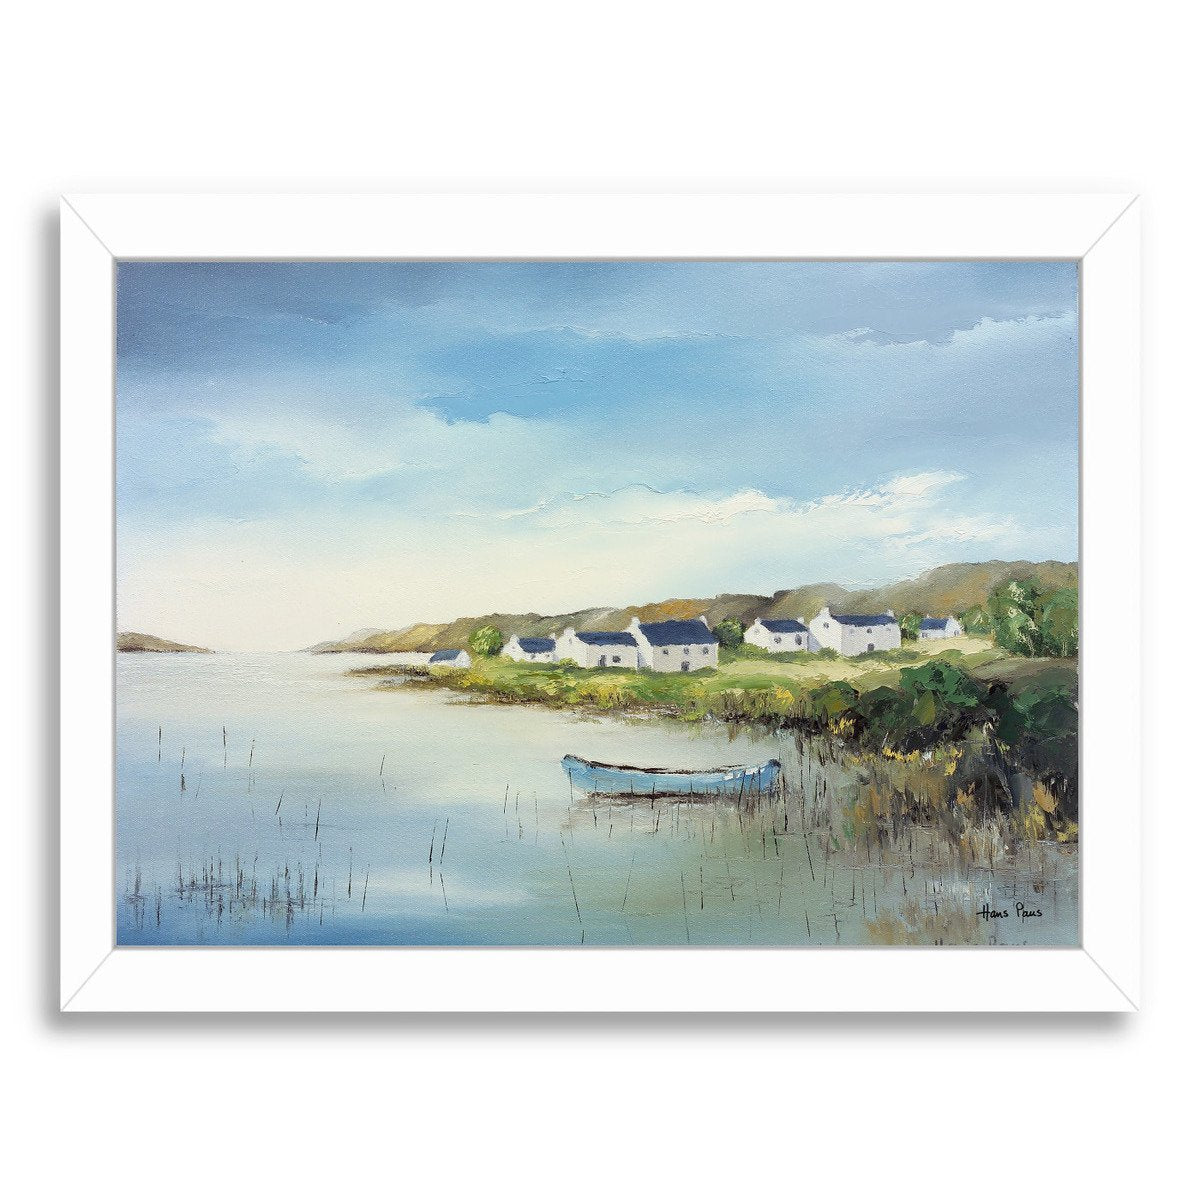 Houses With Boat By Hans Paus - Framed Print - Americanflat